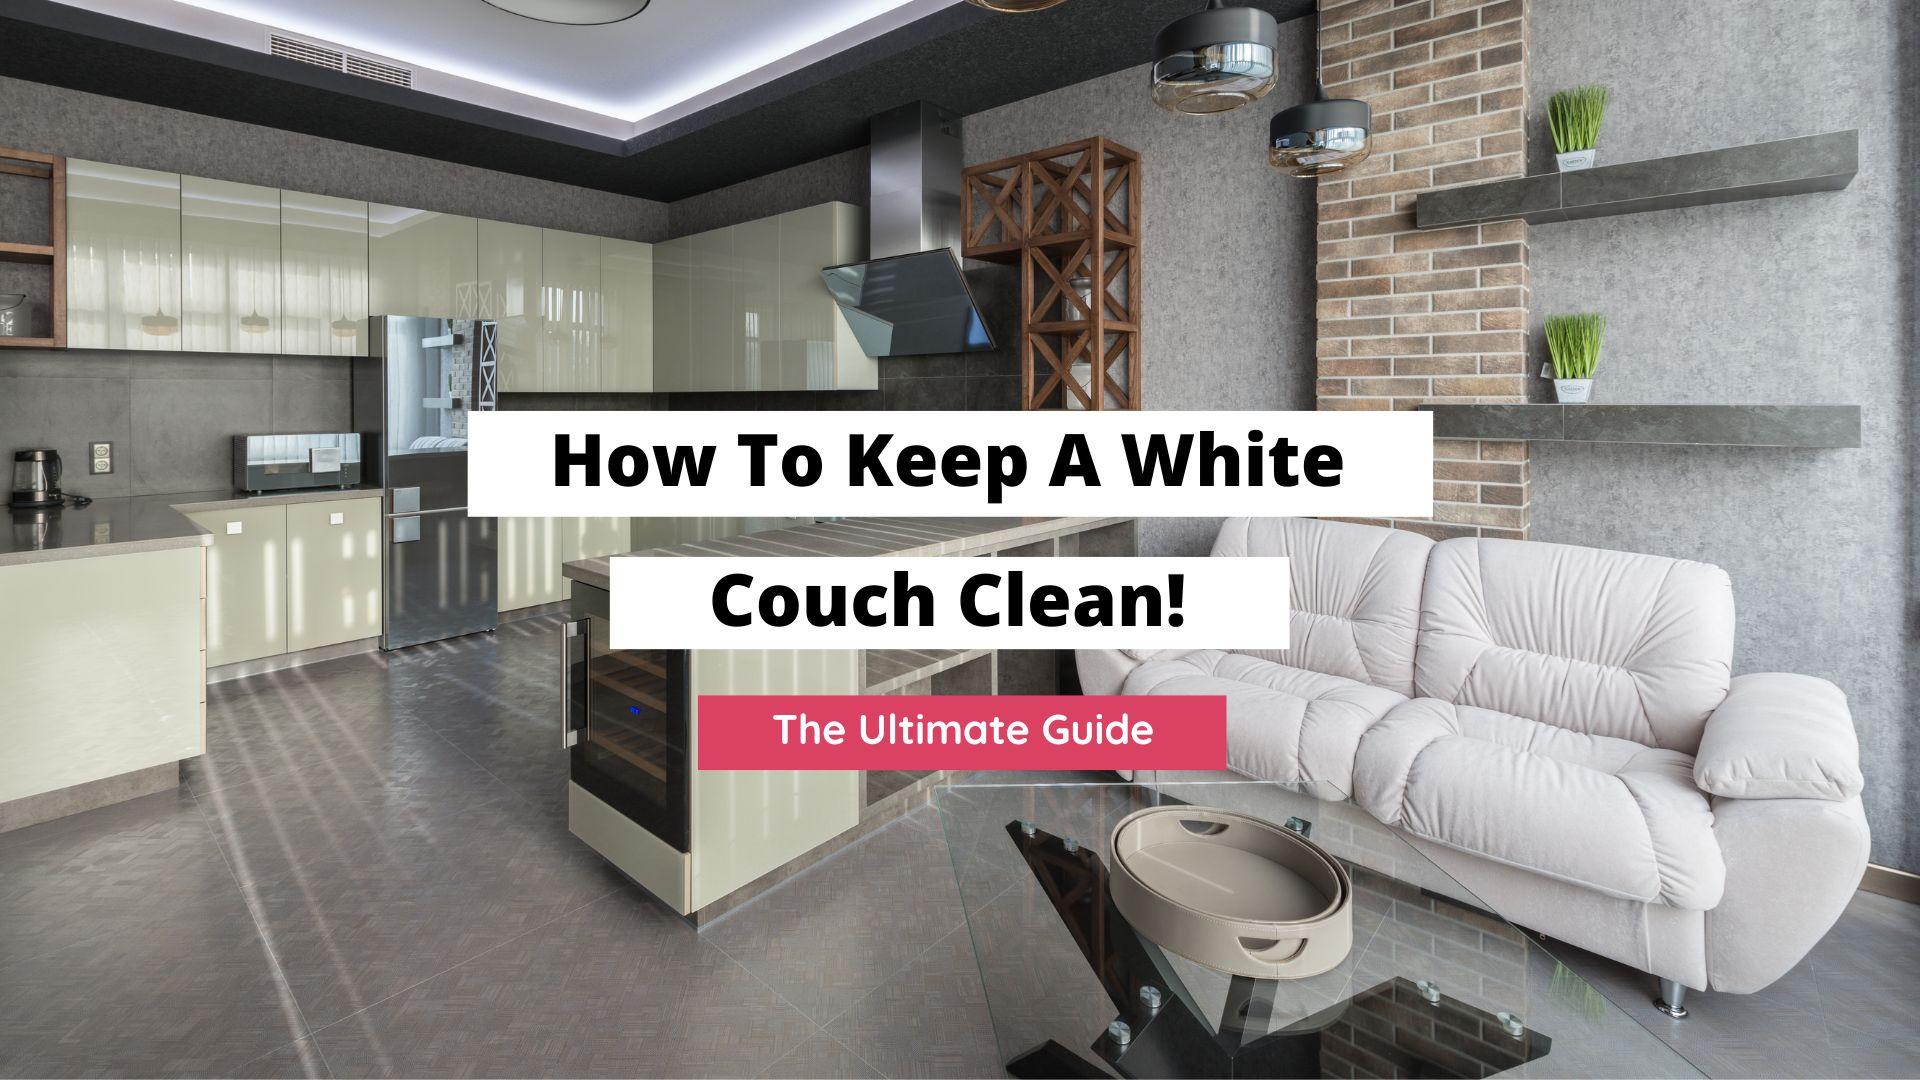 white couch cleaning tips, how to keep a white couch clean